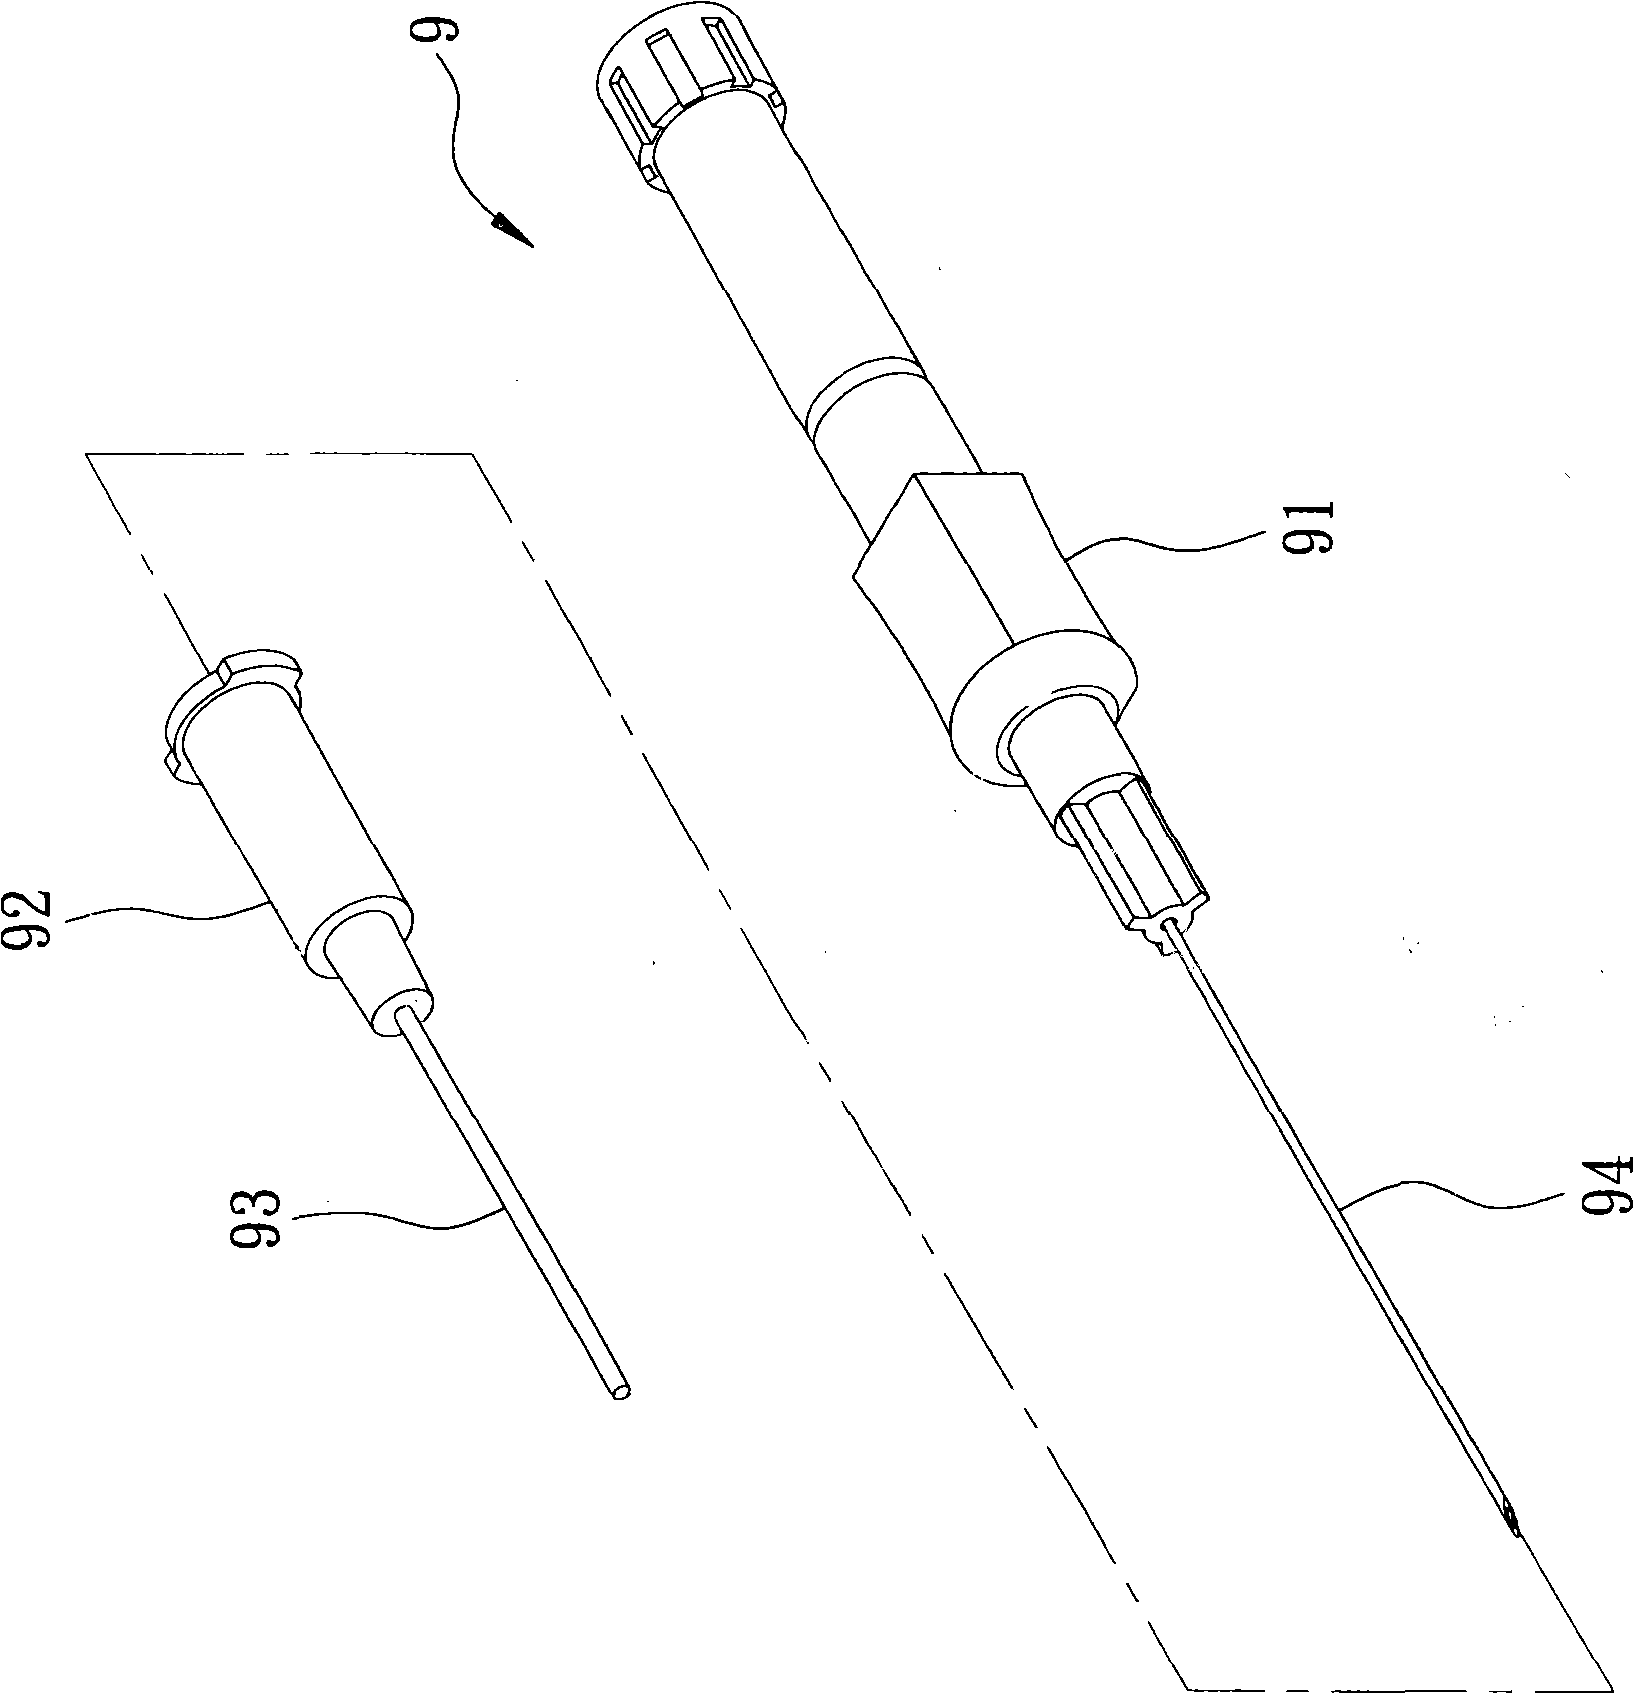 Intravenous tube placing device